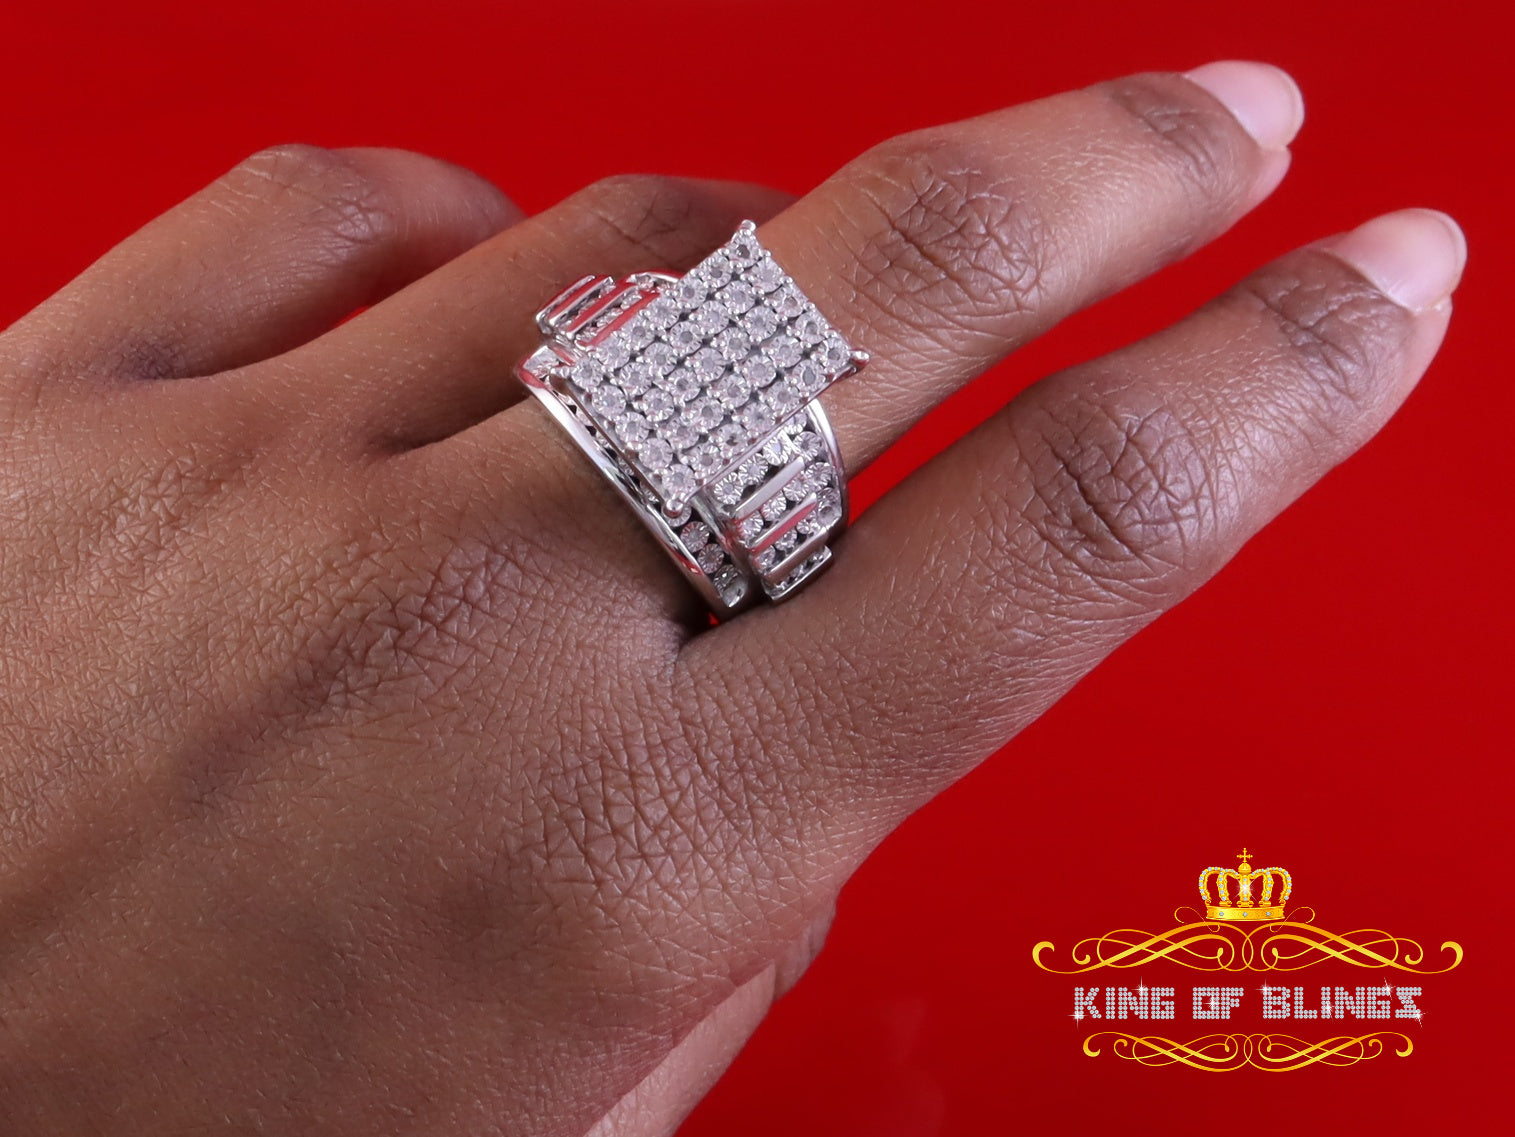 King Of Bling's White Cinderella Rectangle Real 0.25ct Diamond 925 Silver Womens Ring Size 7 KING OF BLINGS